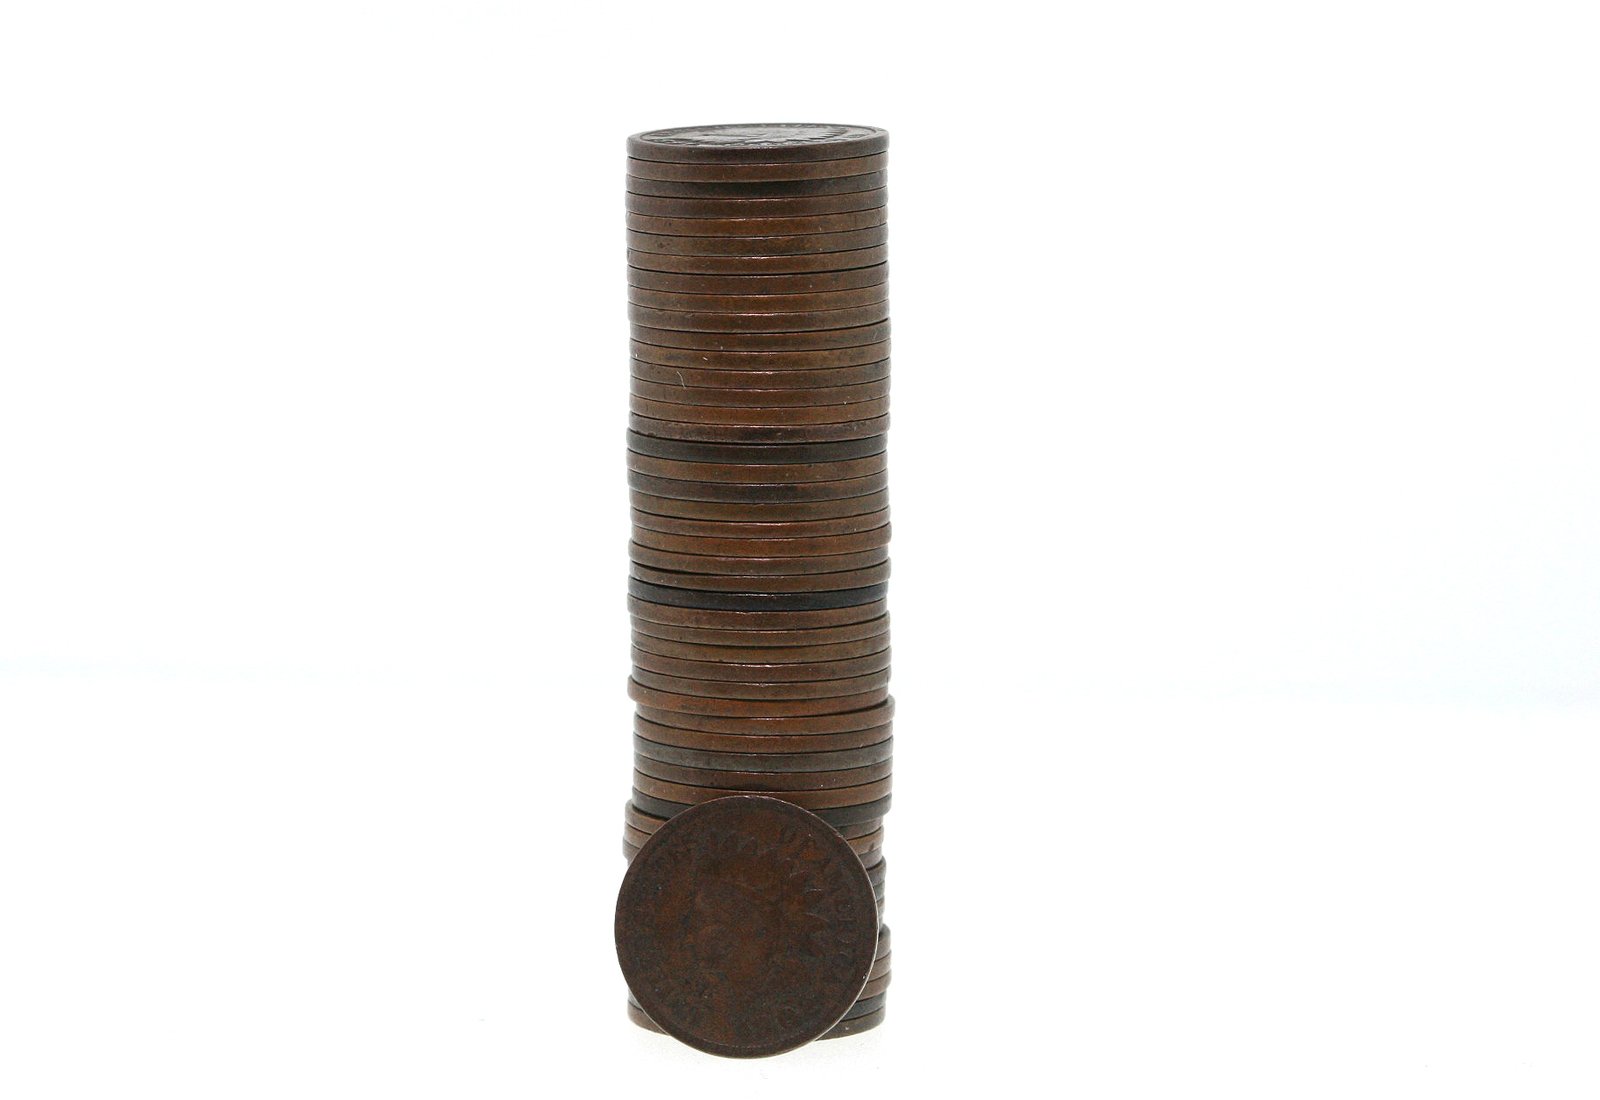 a stack of brown coin stacks on top of each other